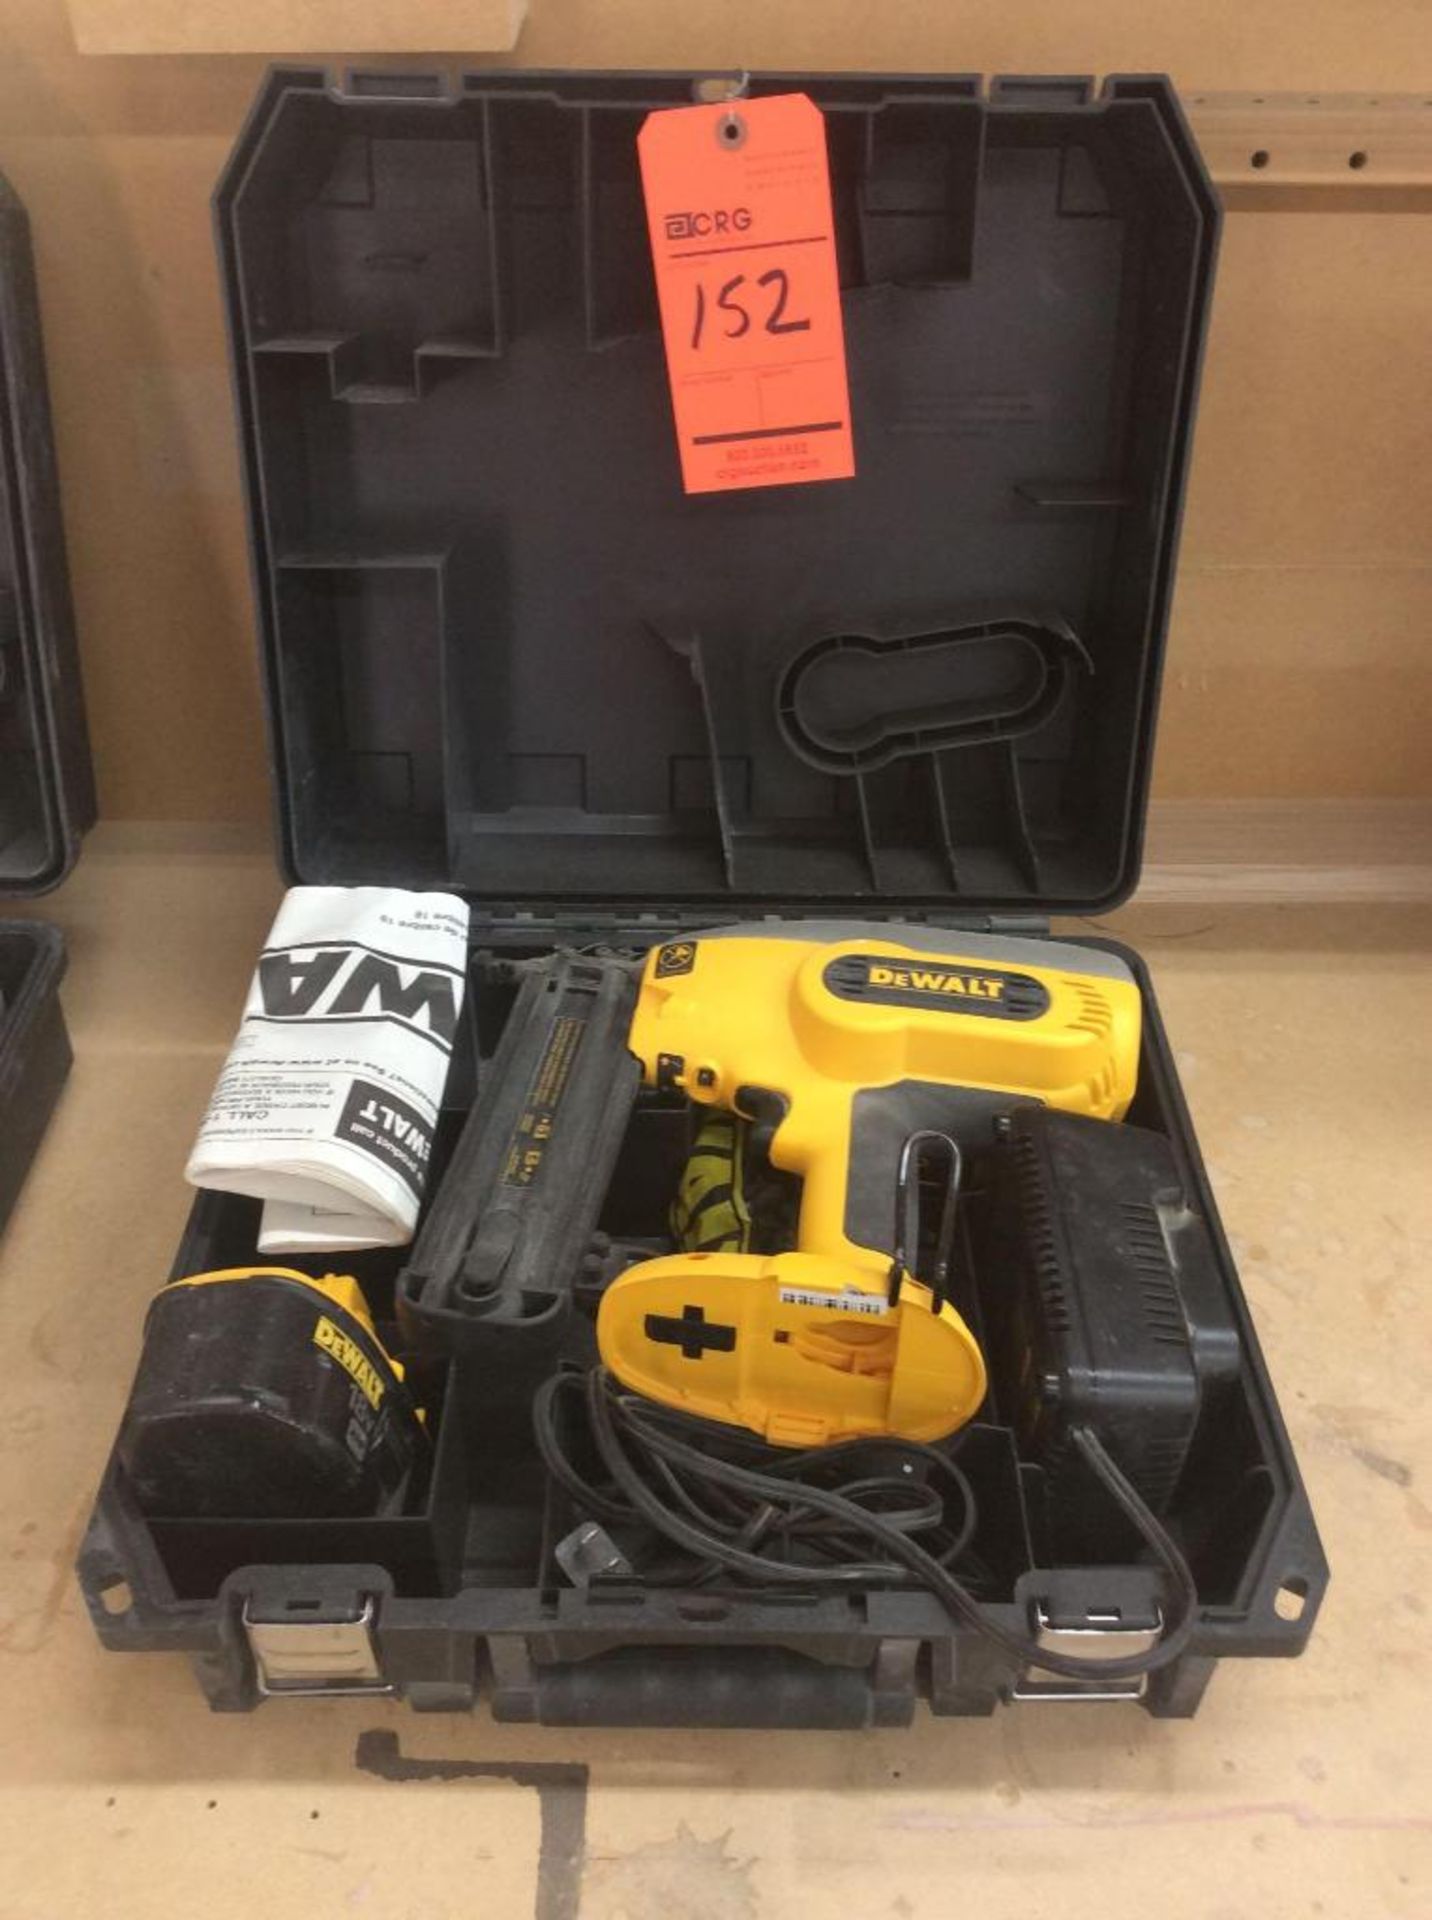 Dewalt cordless battery operated finish nailer, mn DC608 18 volt battery and charger with case